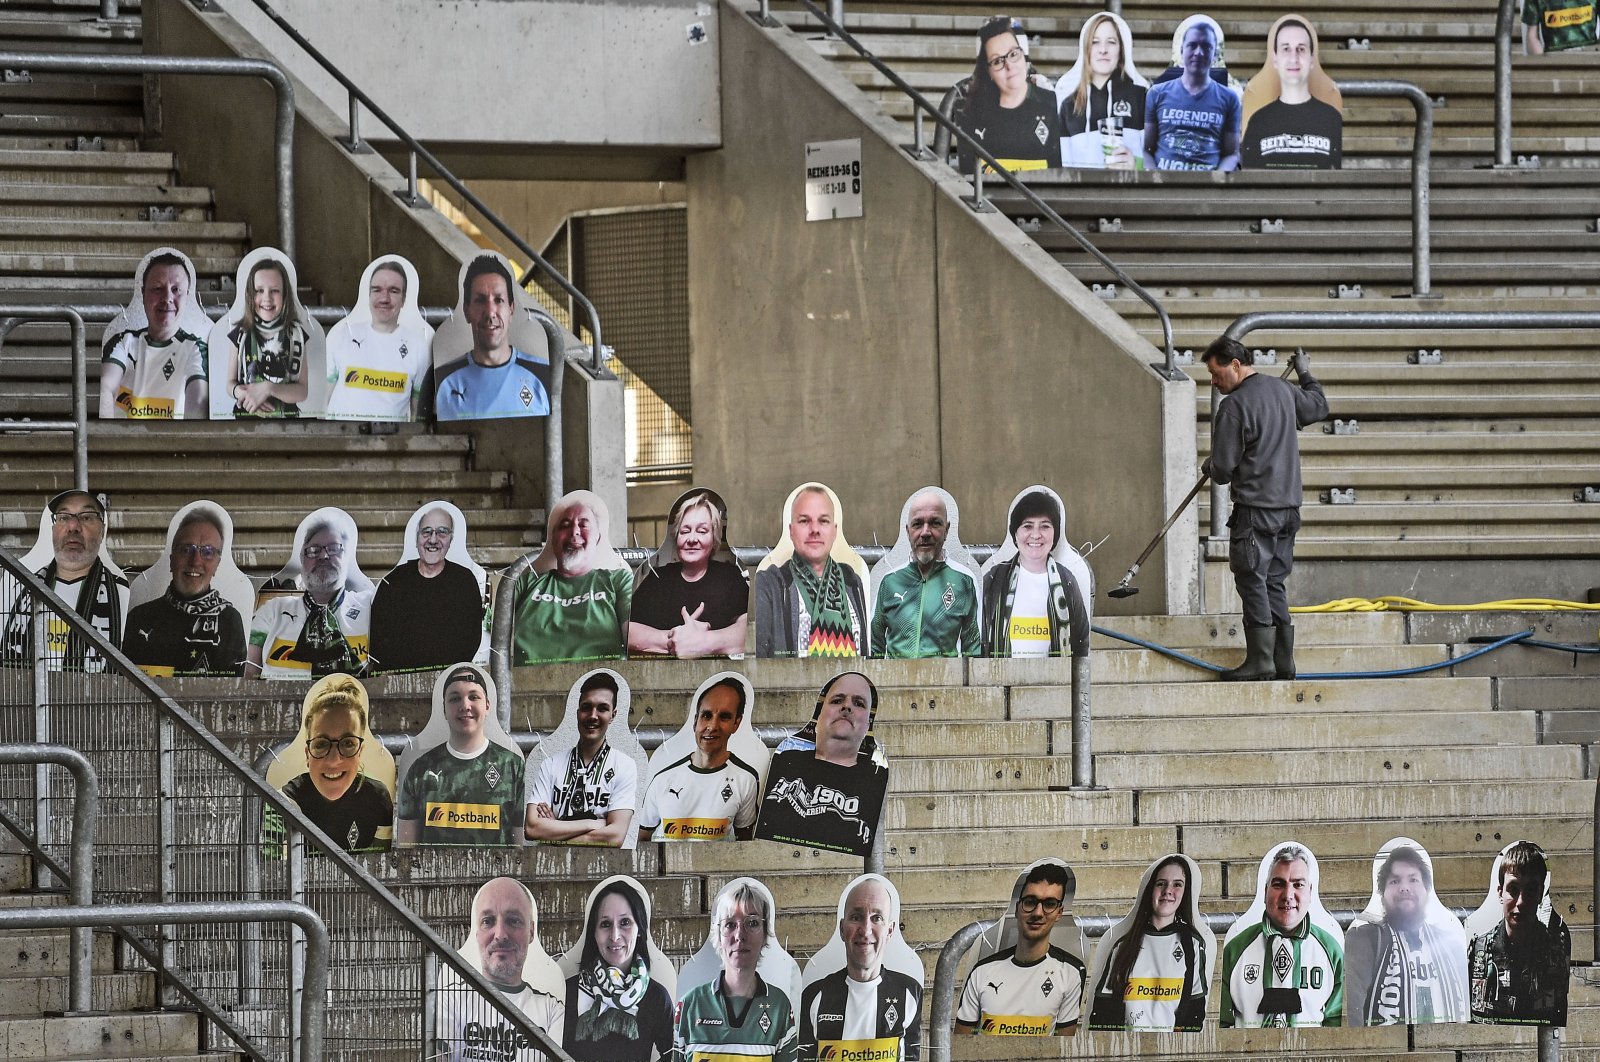 A worker cleans the supporters' tribune where portraits of fans of German Bundesliga soccer club Borussia Moenchengladbach are set in the stadium in Moenchengladbach, Germany, April 16, 2020. (AP Photo)